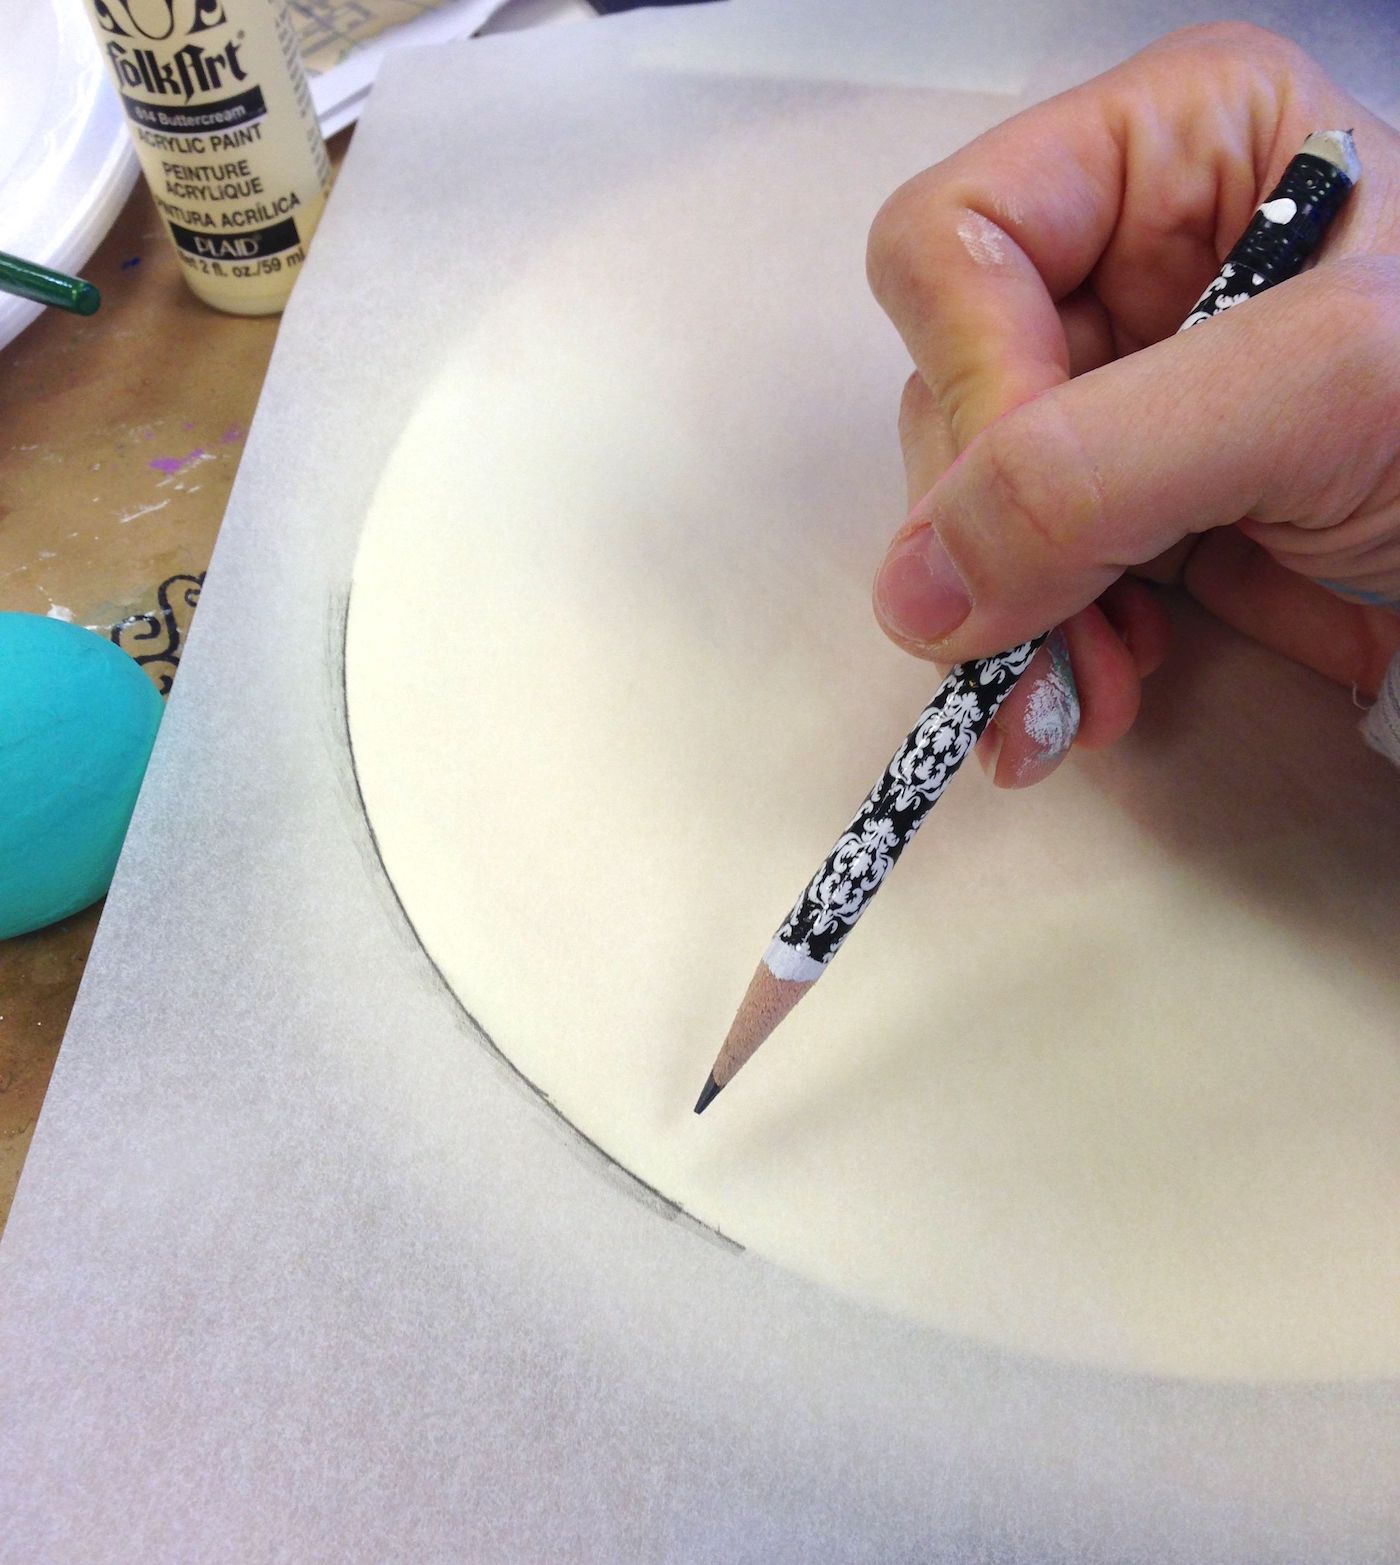 Tracing a clock face with tracing paper and a pencil